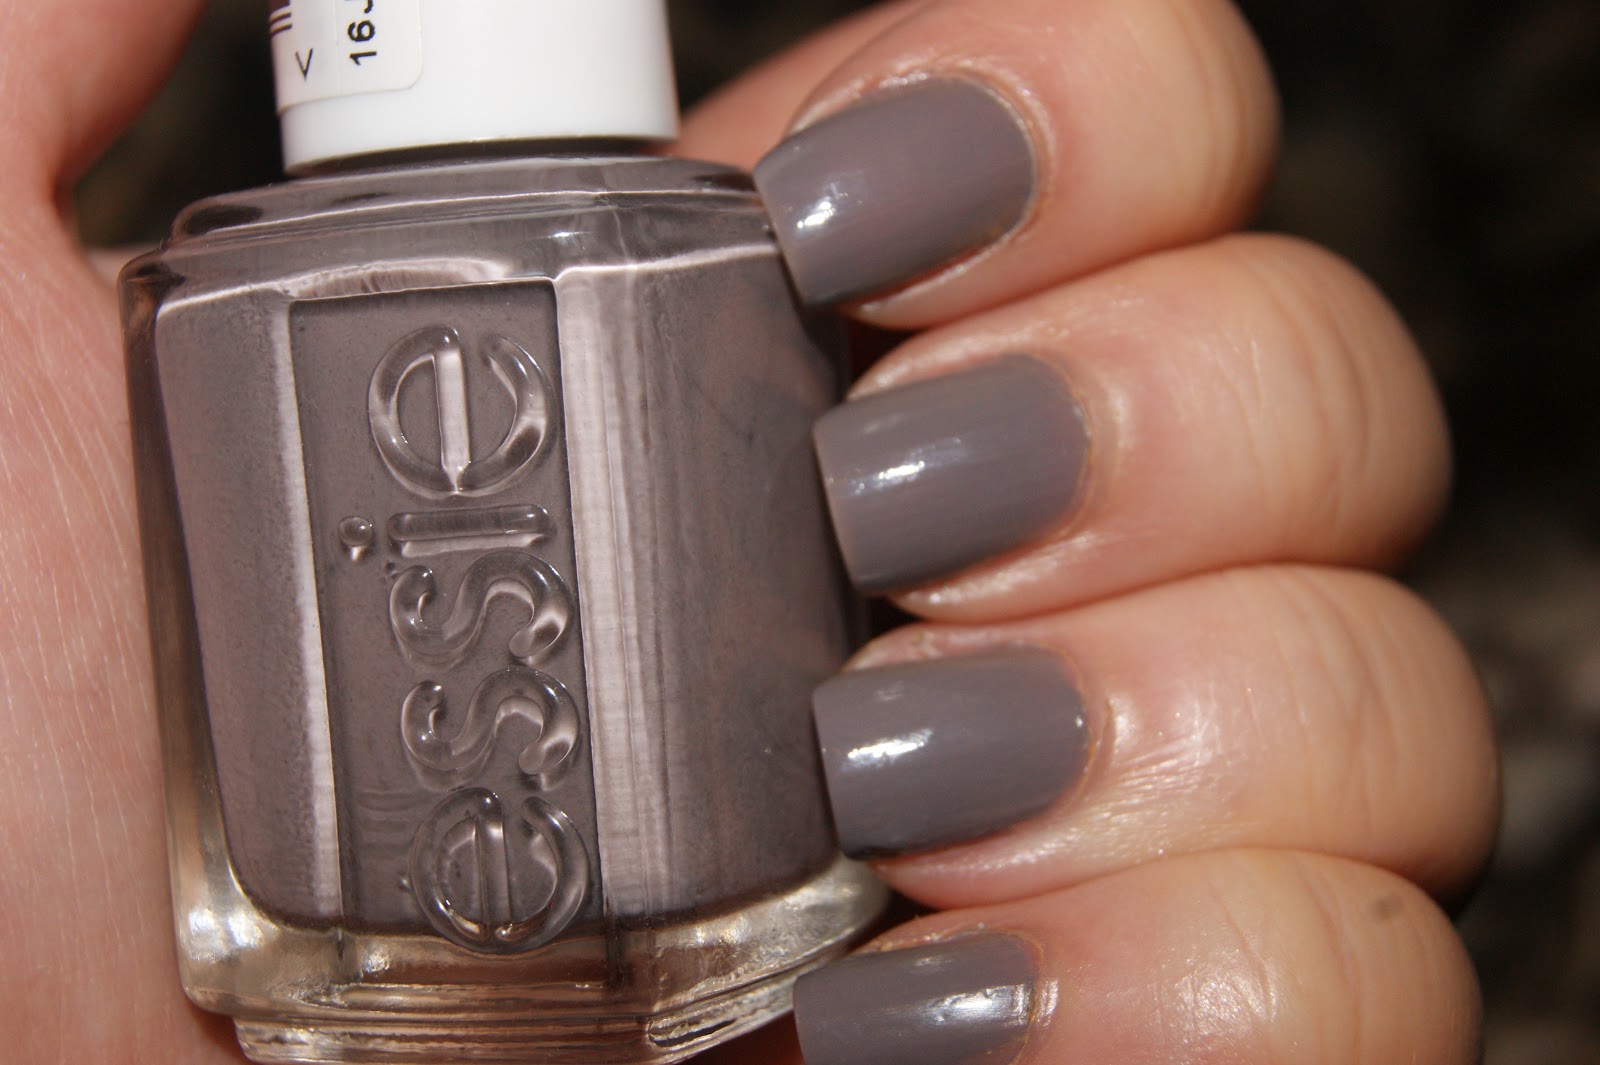 9. "Essie Nail Polish in Chinchilly" - wide 1